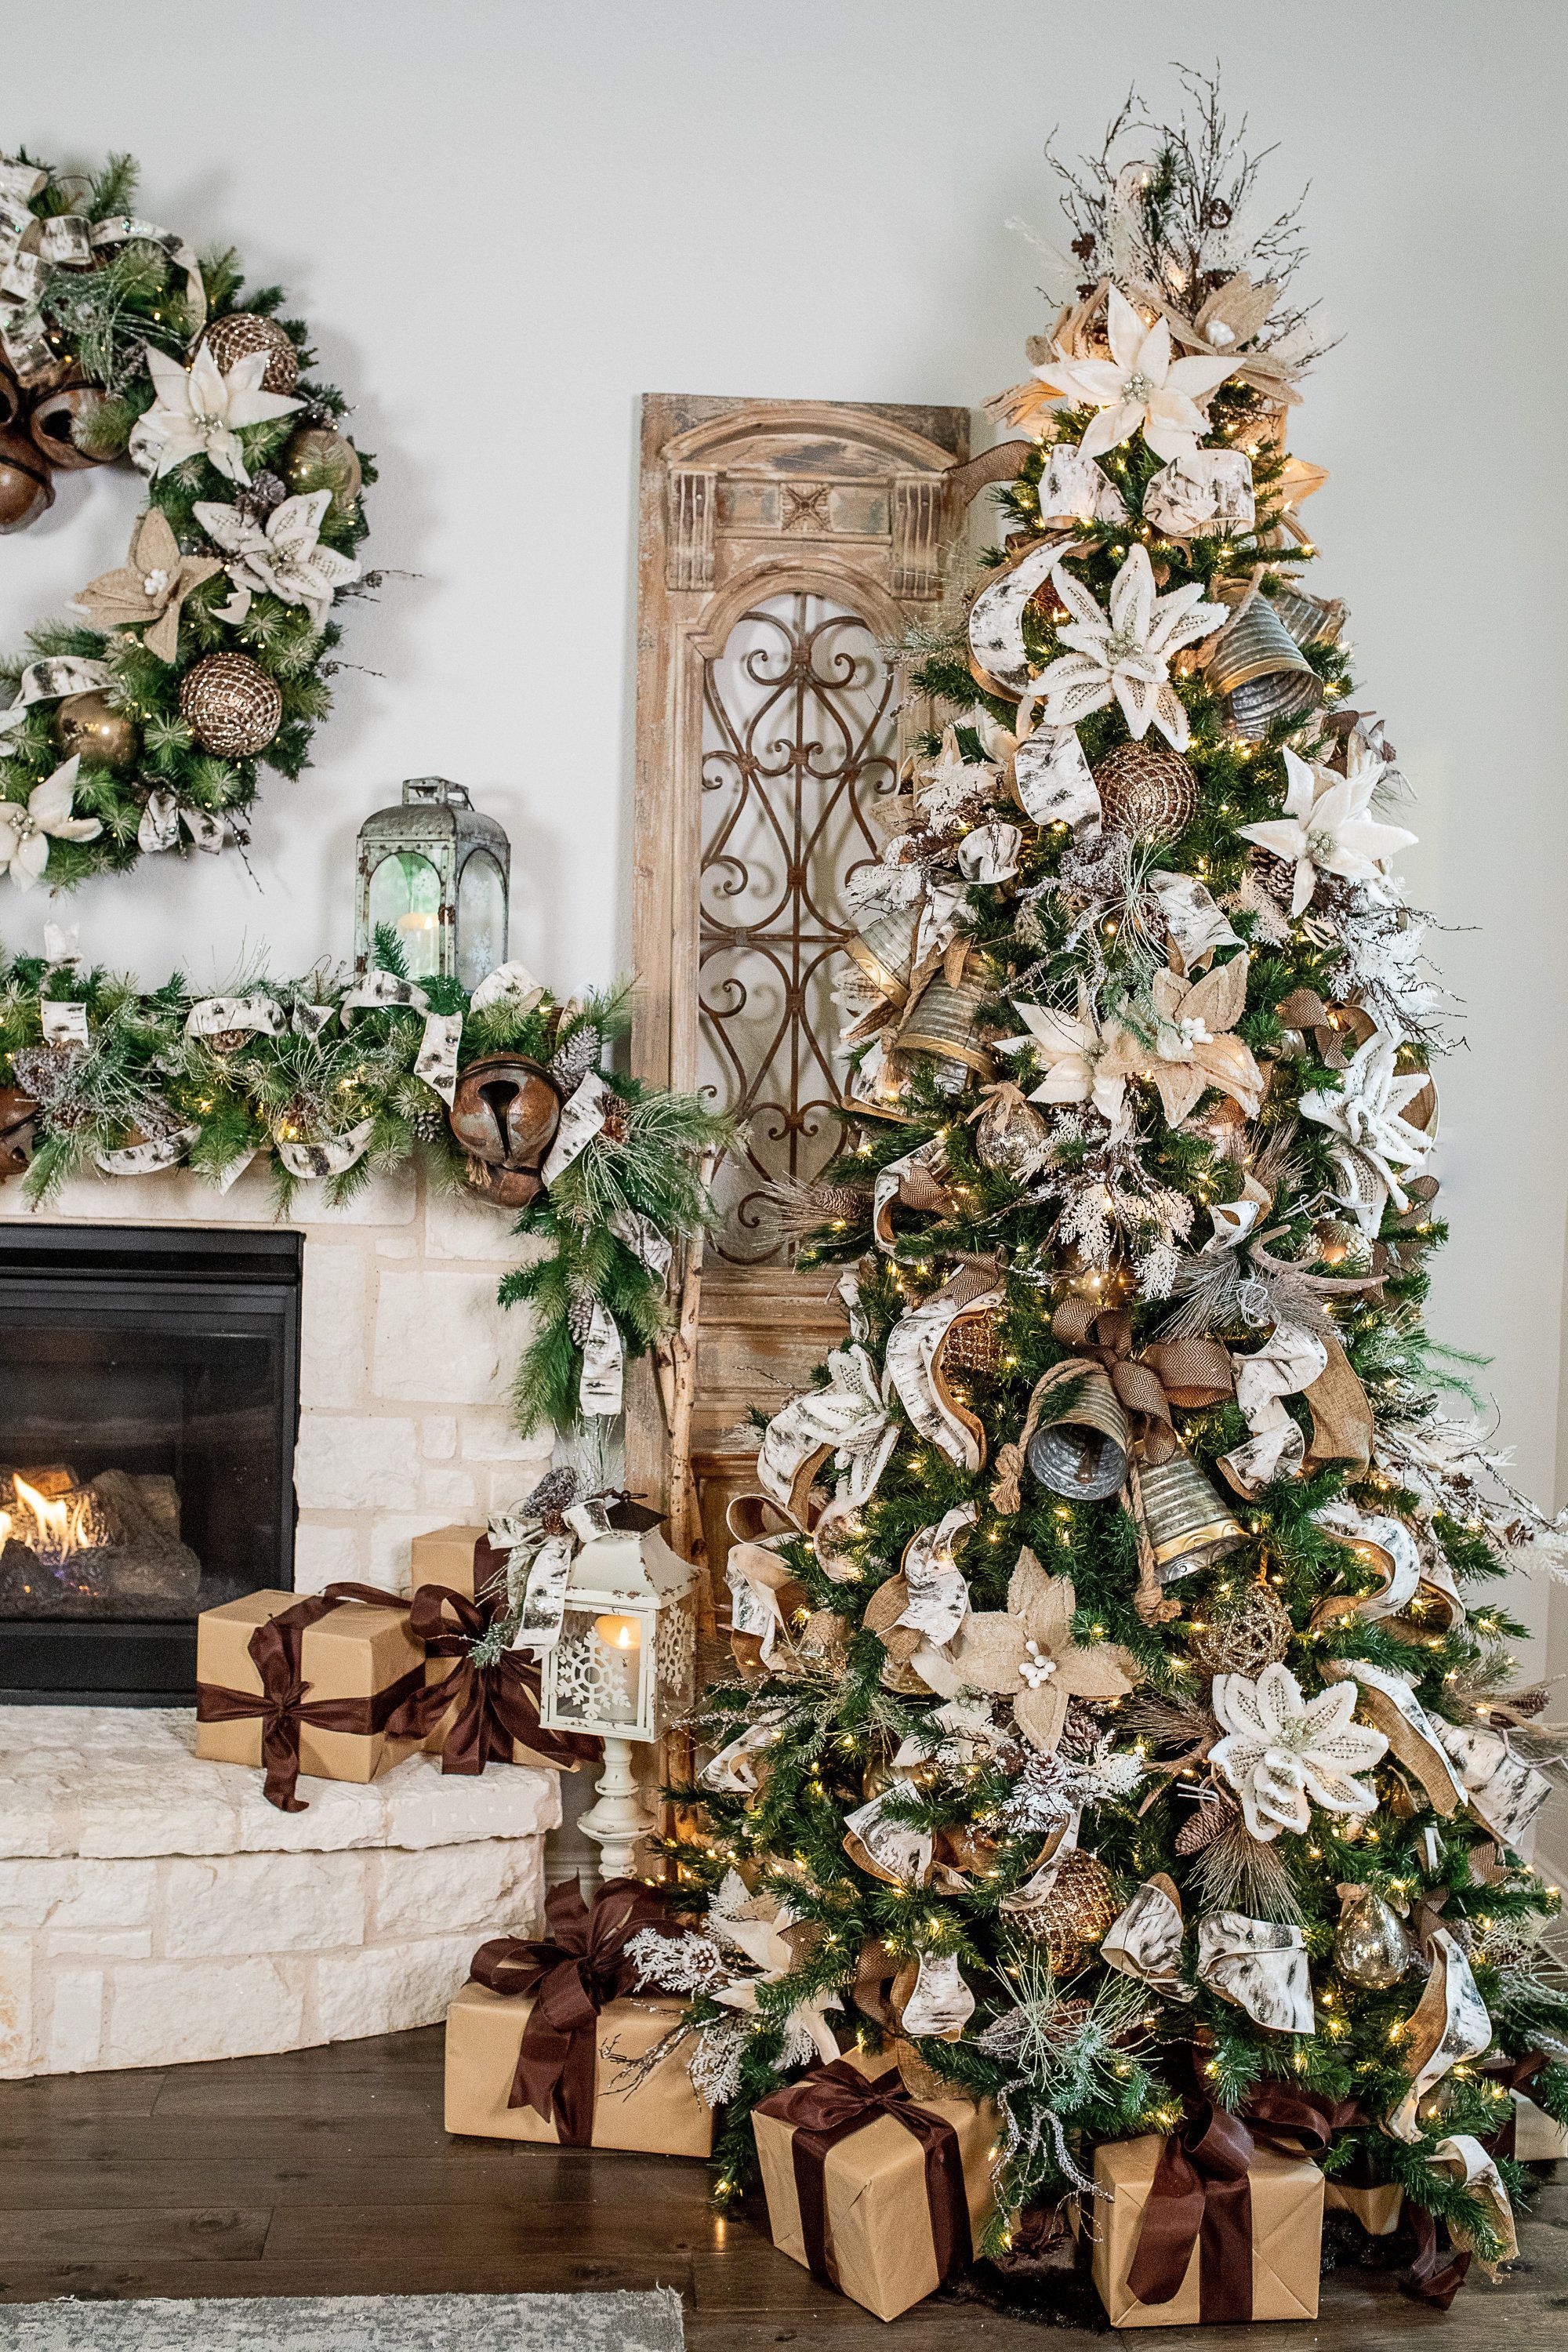 Top Trends in Christmas Home Decor for 2020 - Top Trends in Christmas Home Decor for 2020 -   17 christmas tree decorations 2020 trends ideas